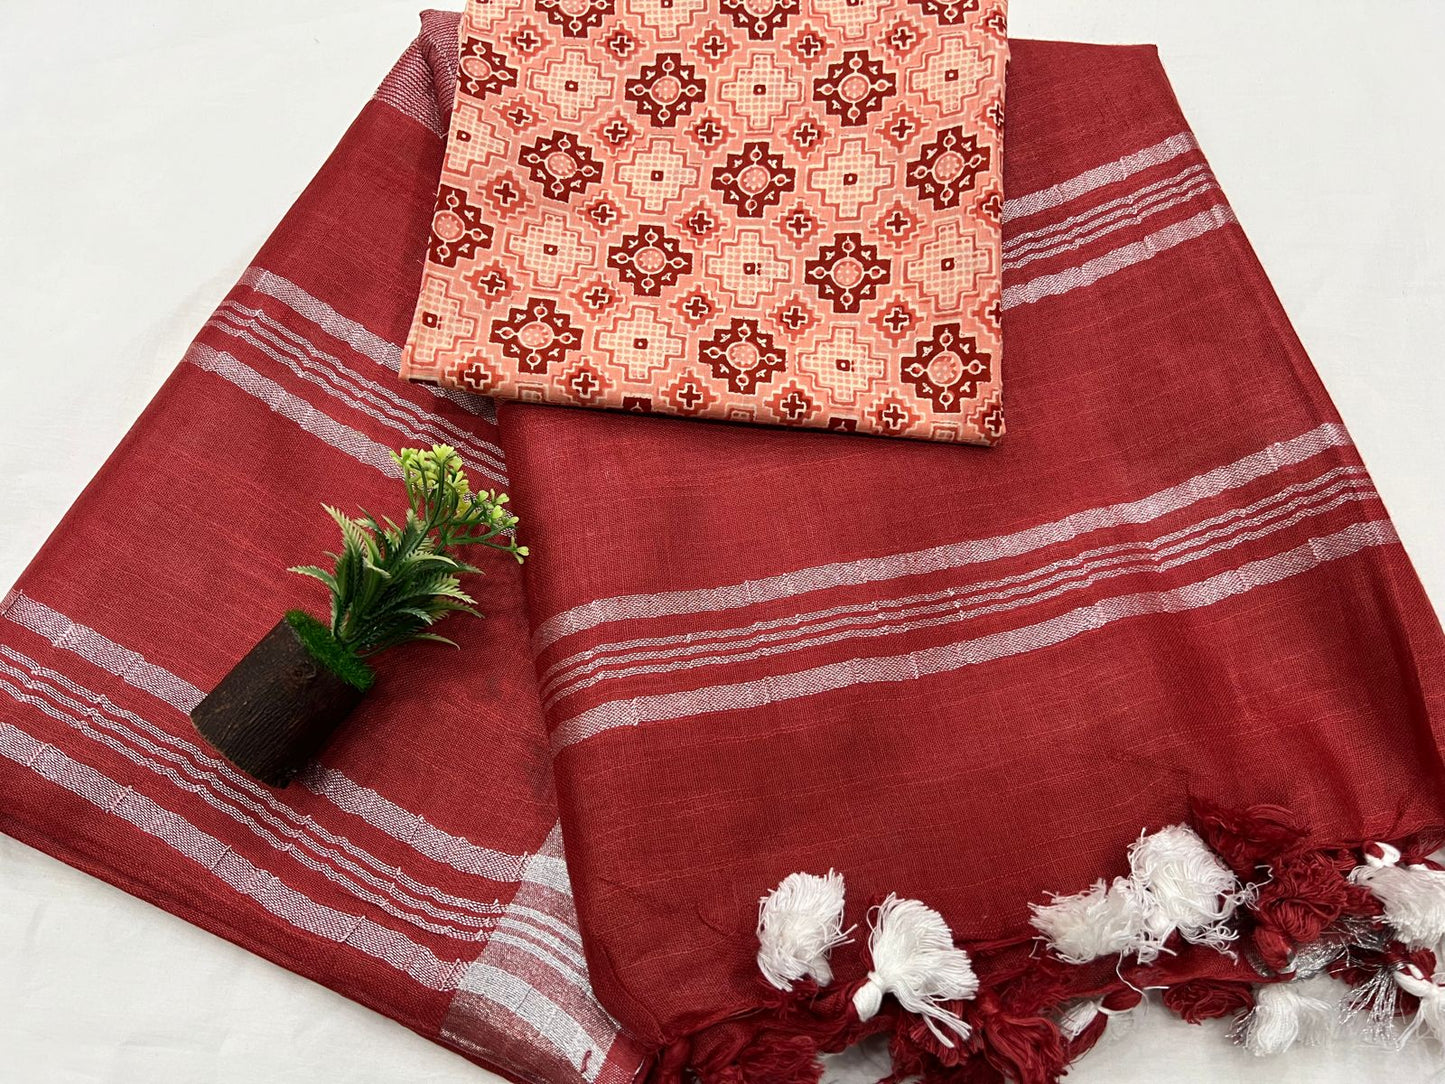 Handloom Cotton linen saree with printed cotton blouse